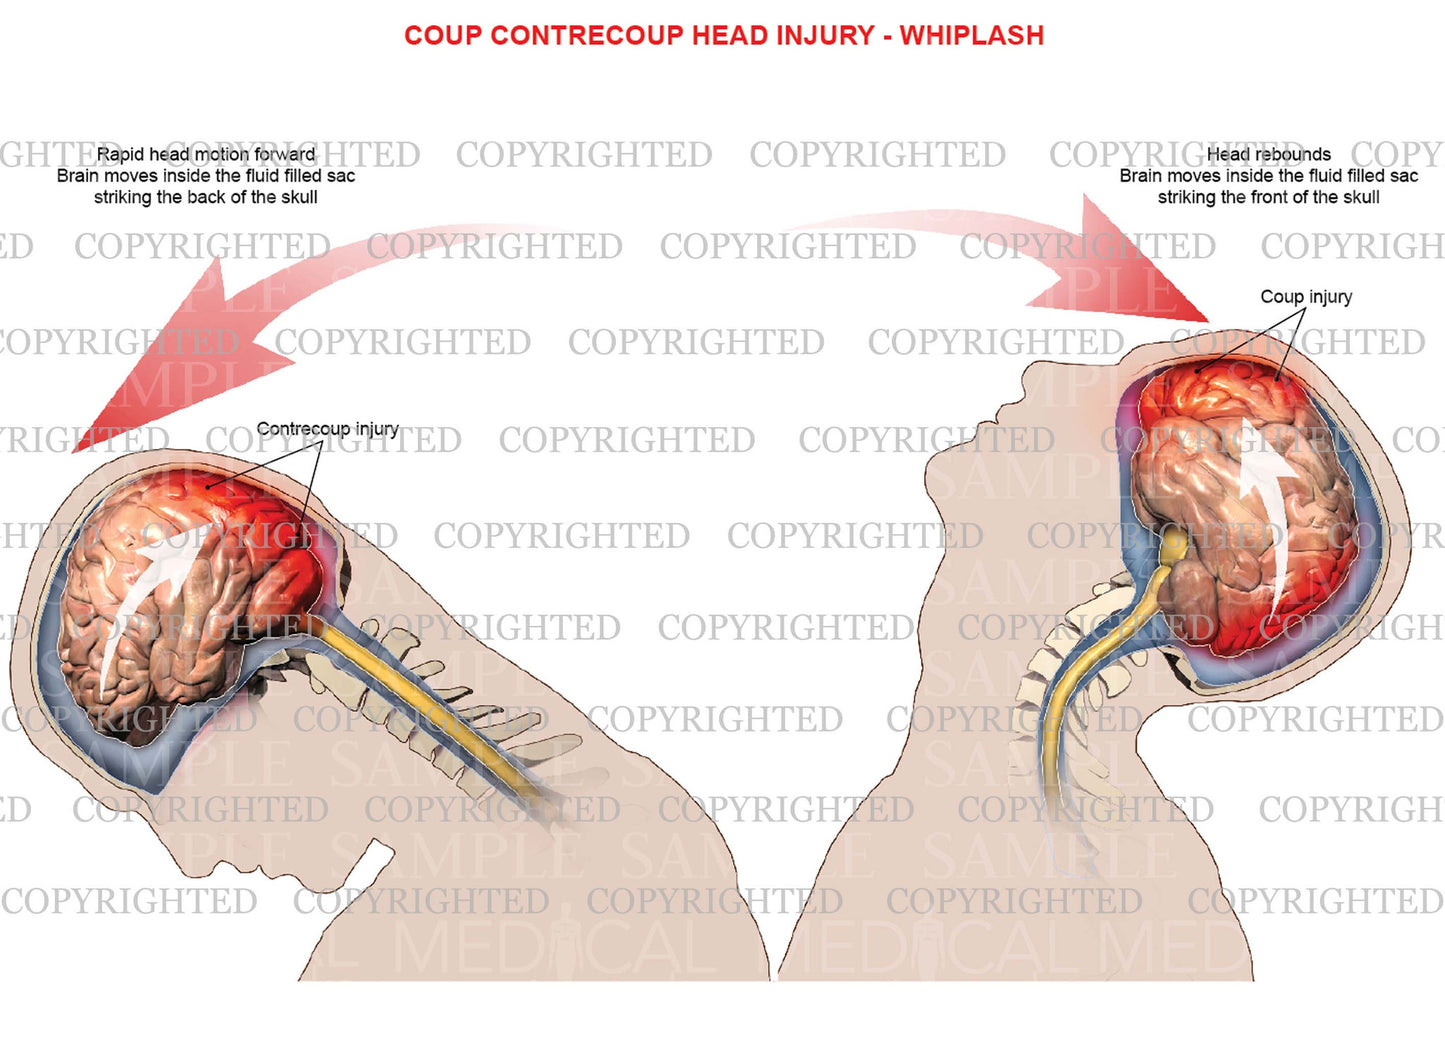 Mechanism of coup, contrecoup head injury - Whiplash